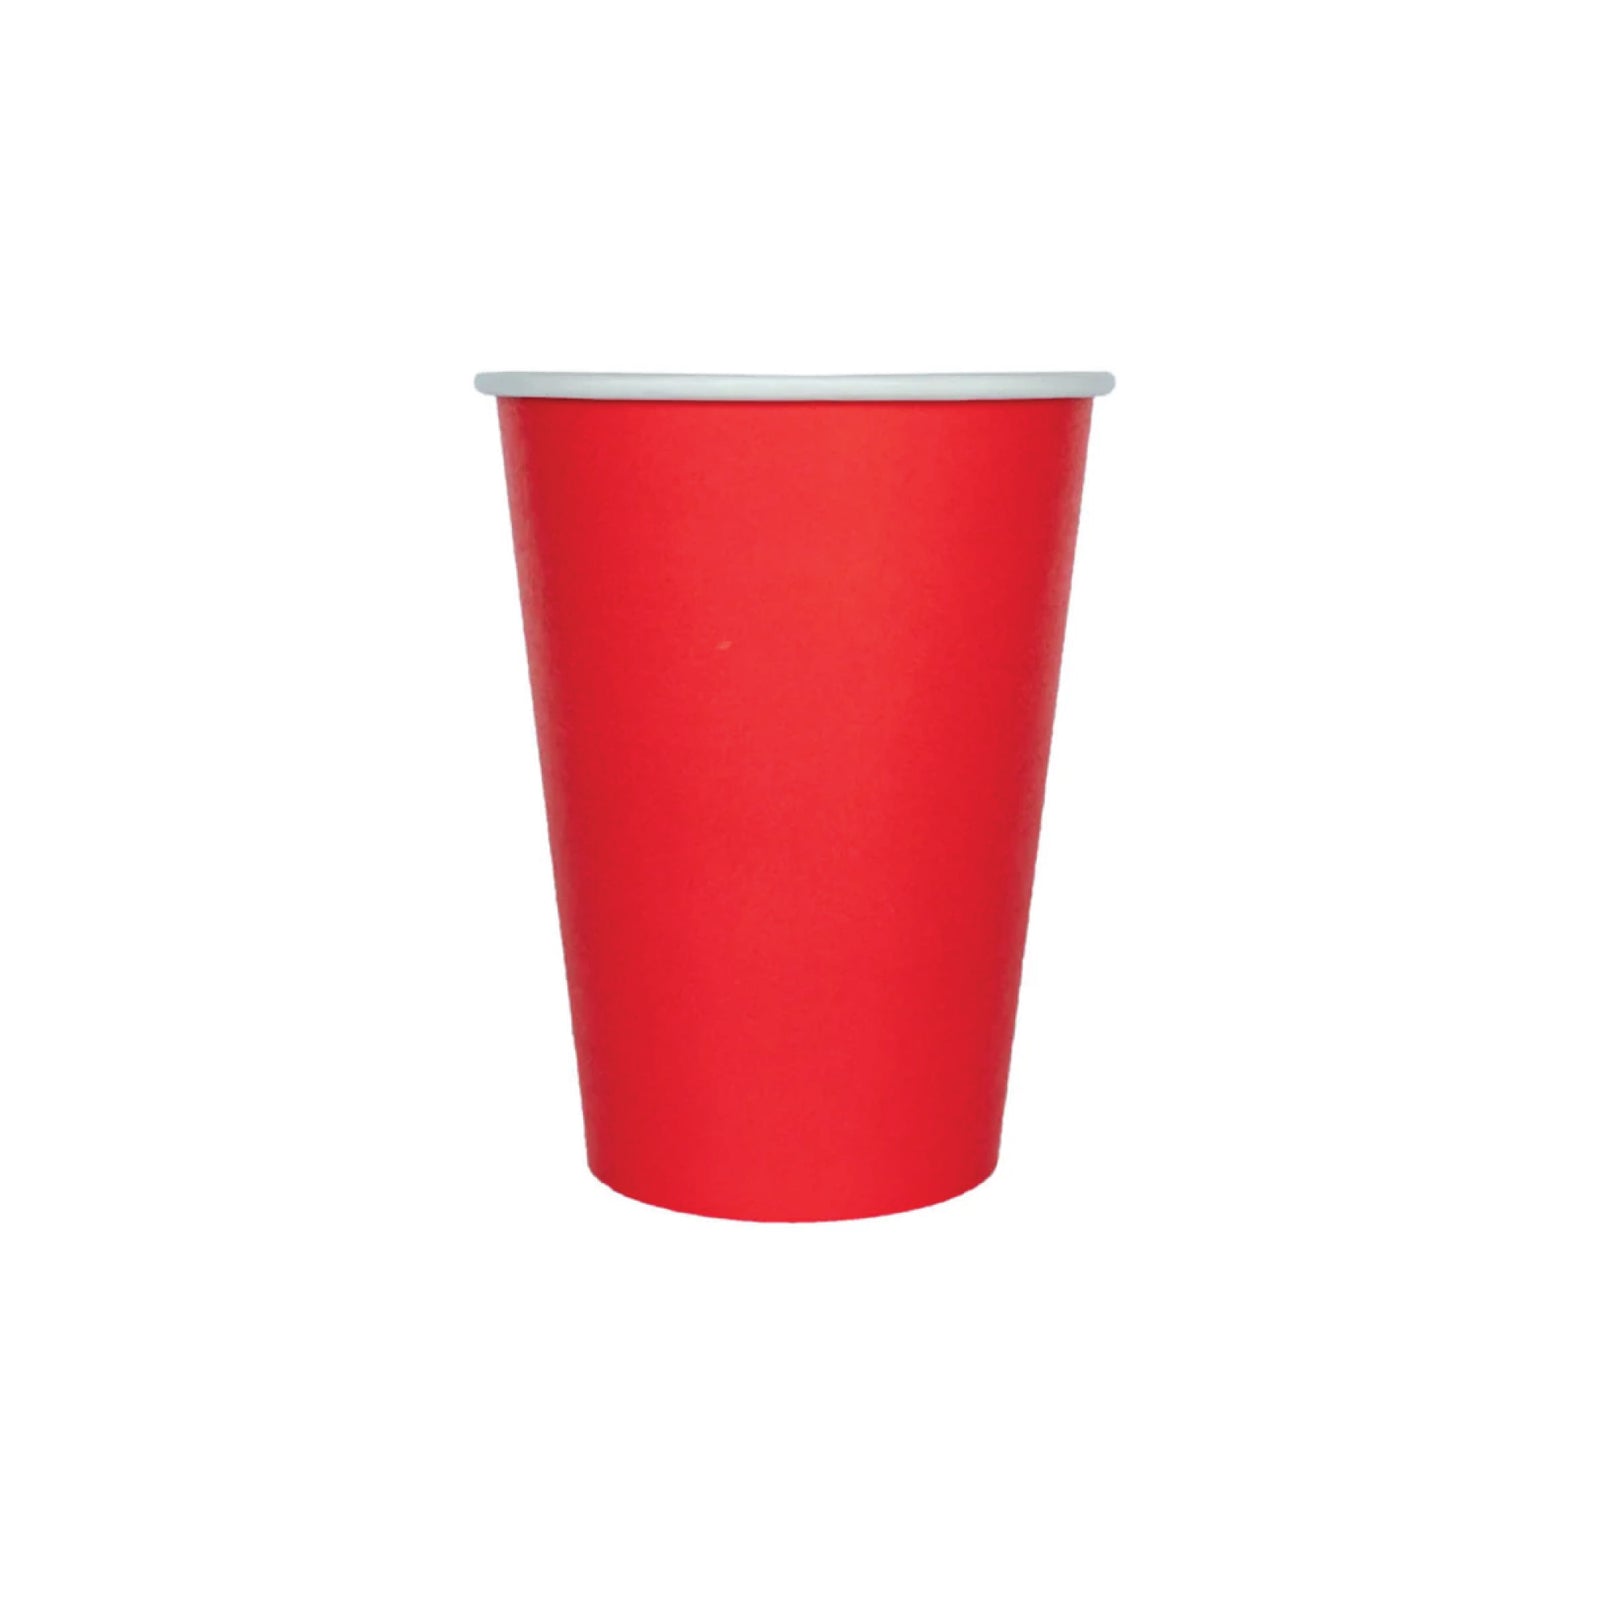 Celebrations Cups, Classic Red, 9 Ounce - 8 cups